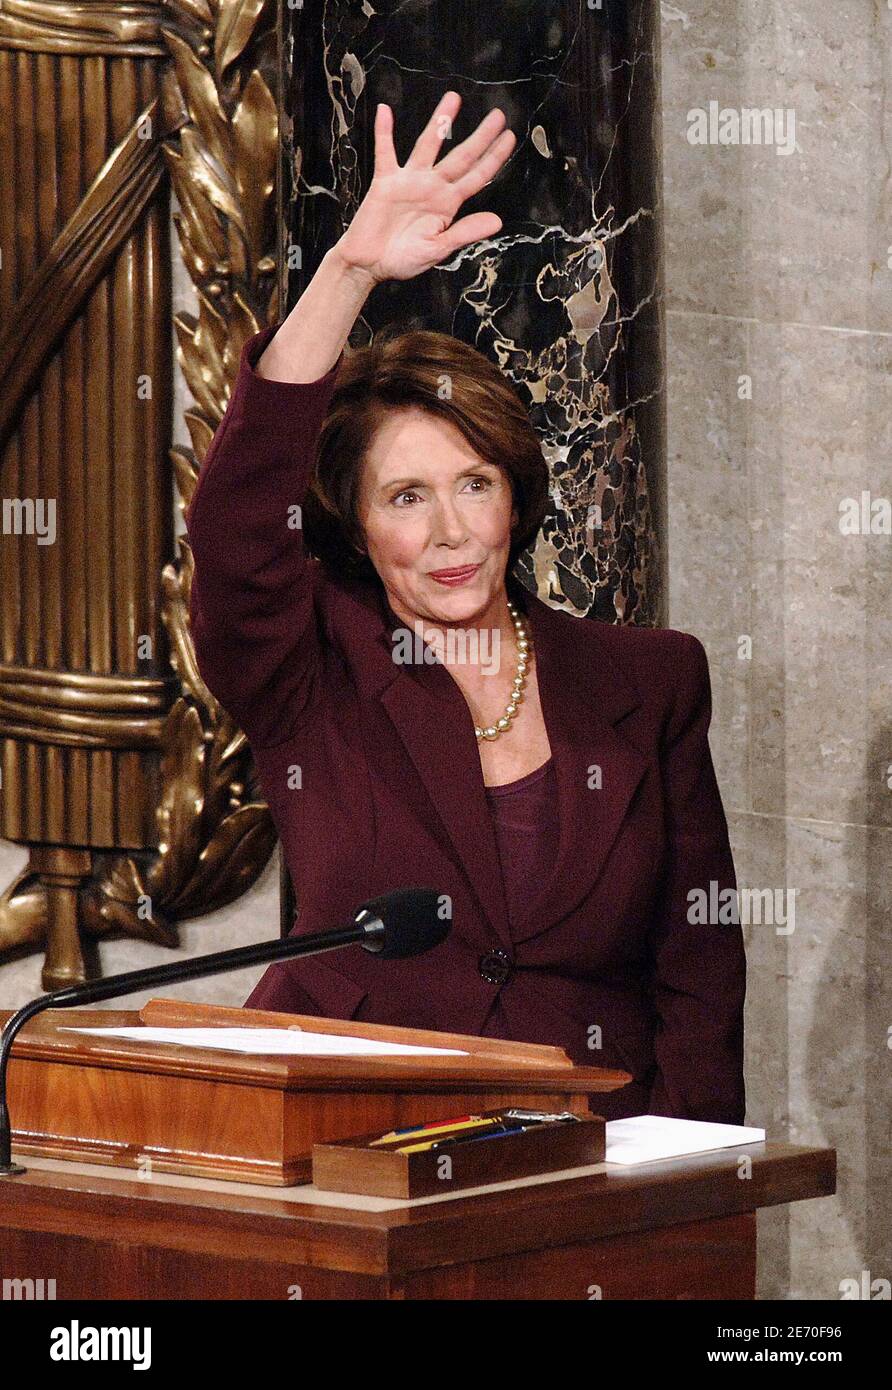 Speaker of the House Nancy Pelosi (D-CA) waves after being elected as the first woman Speaker during a swearing in ceremony for the 110th Congress in the House Chamber of the U.S. Capitol, on January 4, 2007 in Washington, DC, USA. Pelosi will lead House Democrats as the Democratic Party takes control of both houses of Congress. Photo by Olivier Douliery/ABACAPRESS.COM Stock Photo